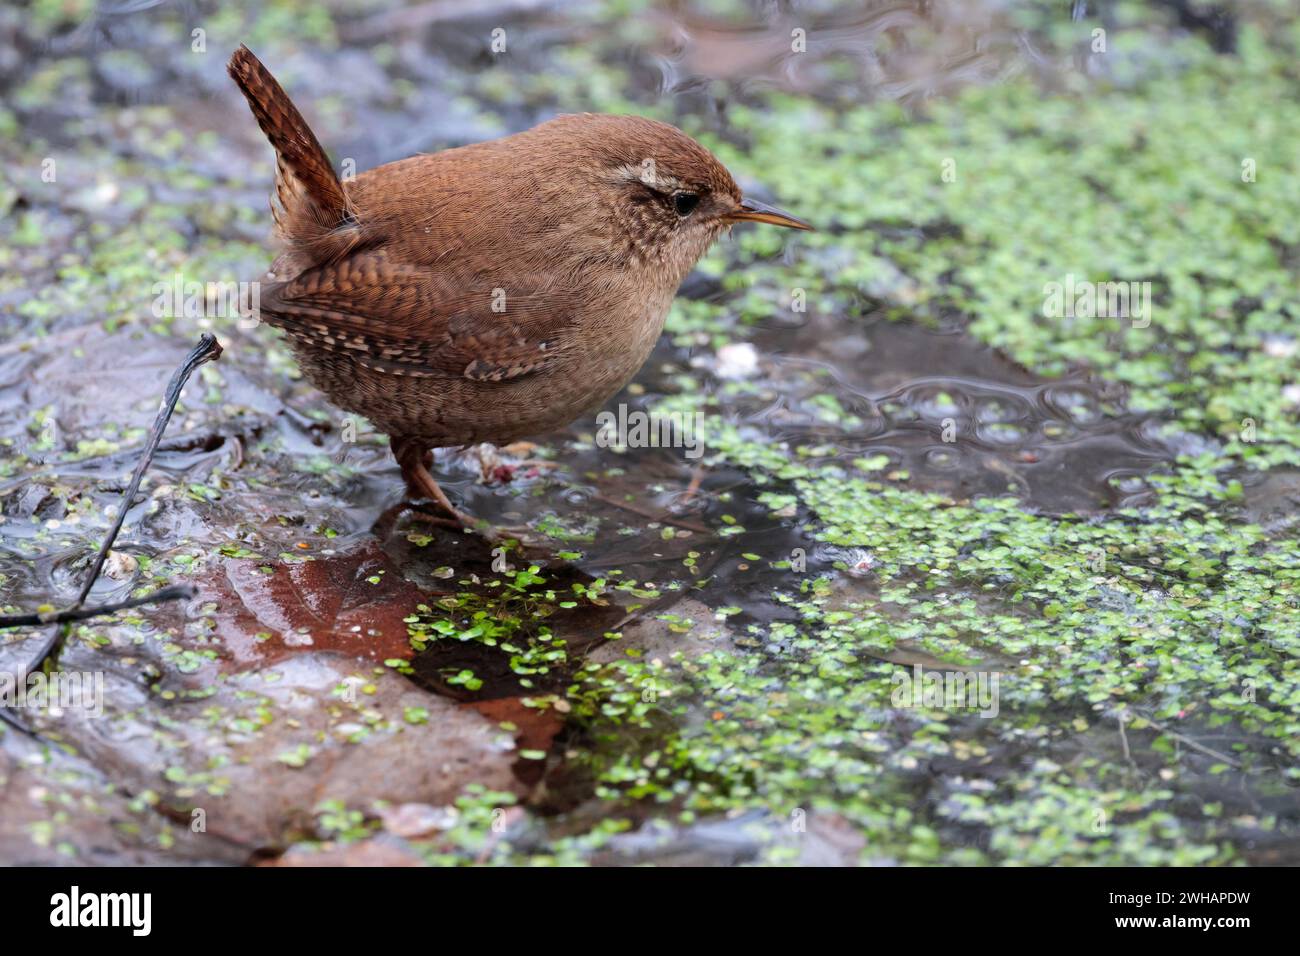 Wren troglodytes x2, walking on water pond weed hunting small dumpy bird brown back and short cocked tail paler underside pale line over eye fine bill Stock Photo